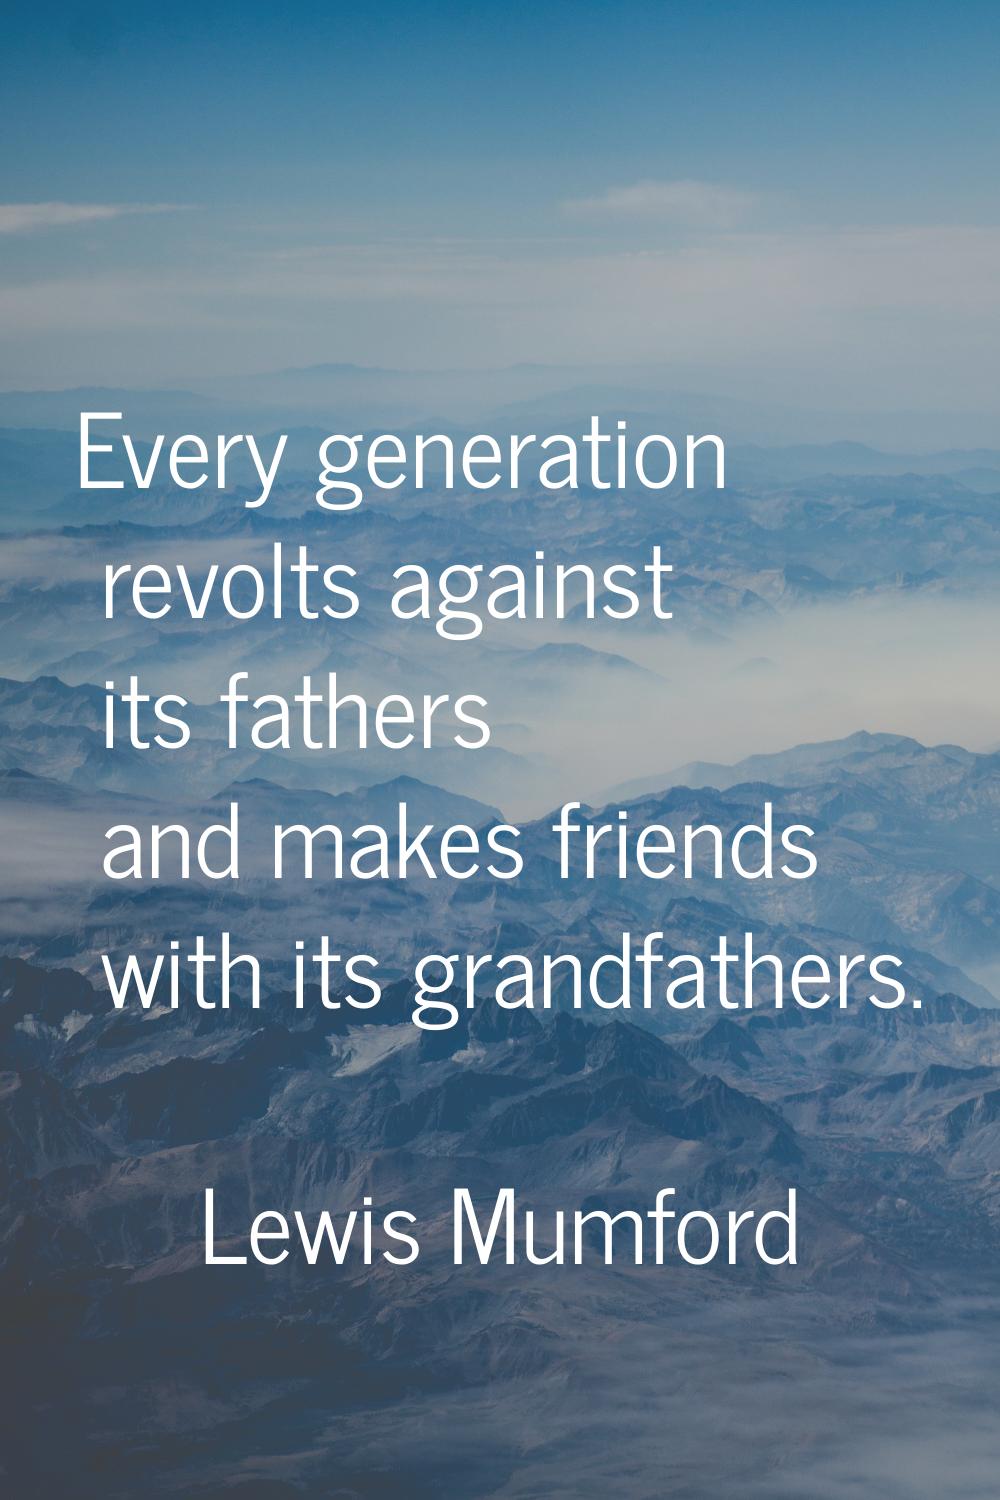 Every generation revolts against its fathers and makes friends with its grandfathers.